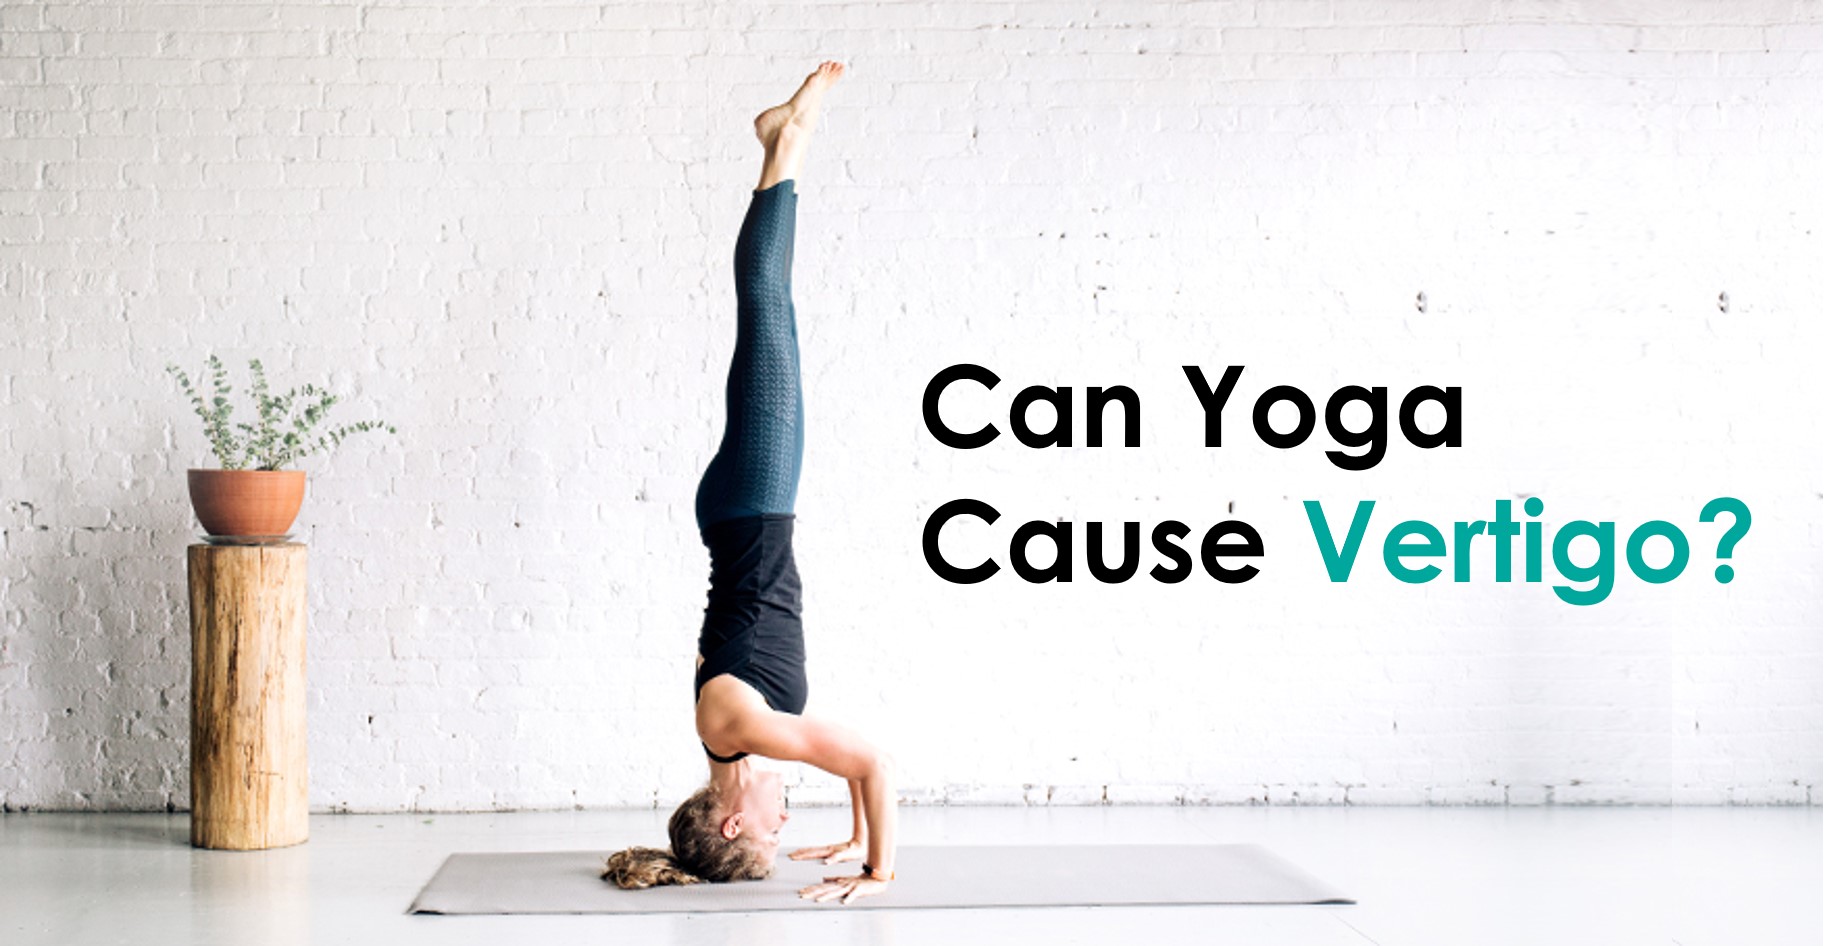 Yoga for Toning: 6 Poses to Build Strength in Your Legs, Core, & Back